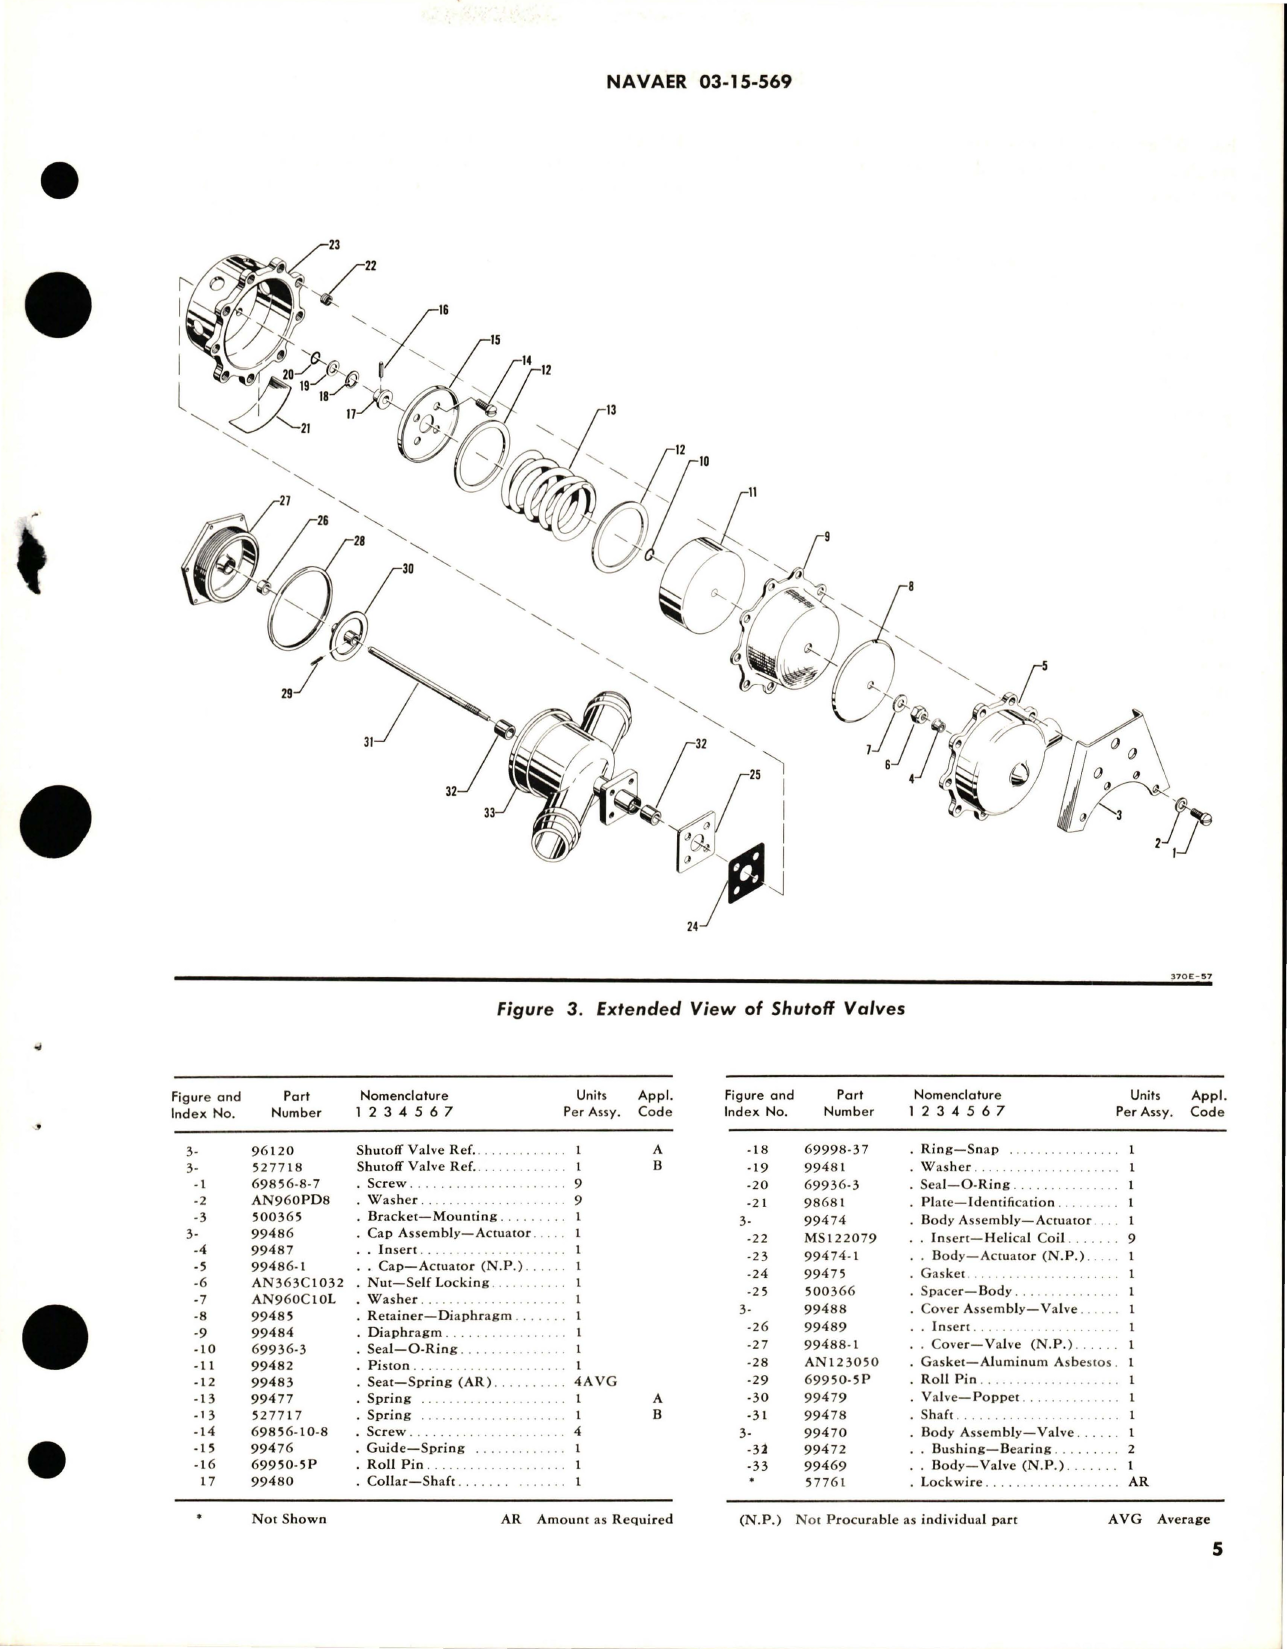 Sample page 5 from AirCorps Library document: Overhaul Instructions with Parts Breakdown for Shutoff Valve - Assembly No. 96120 and 527718